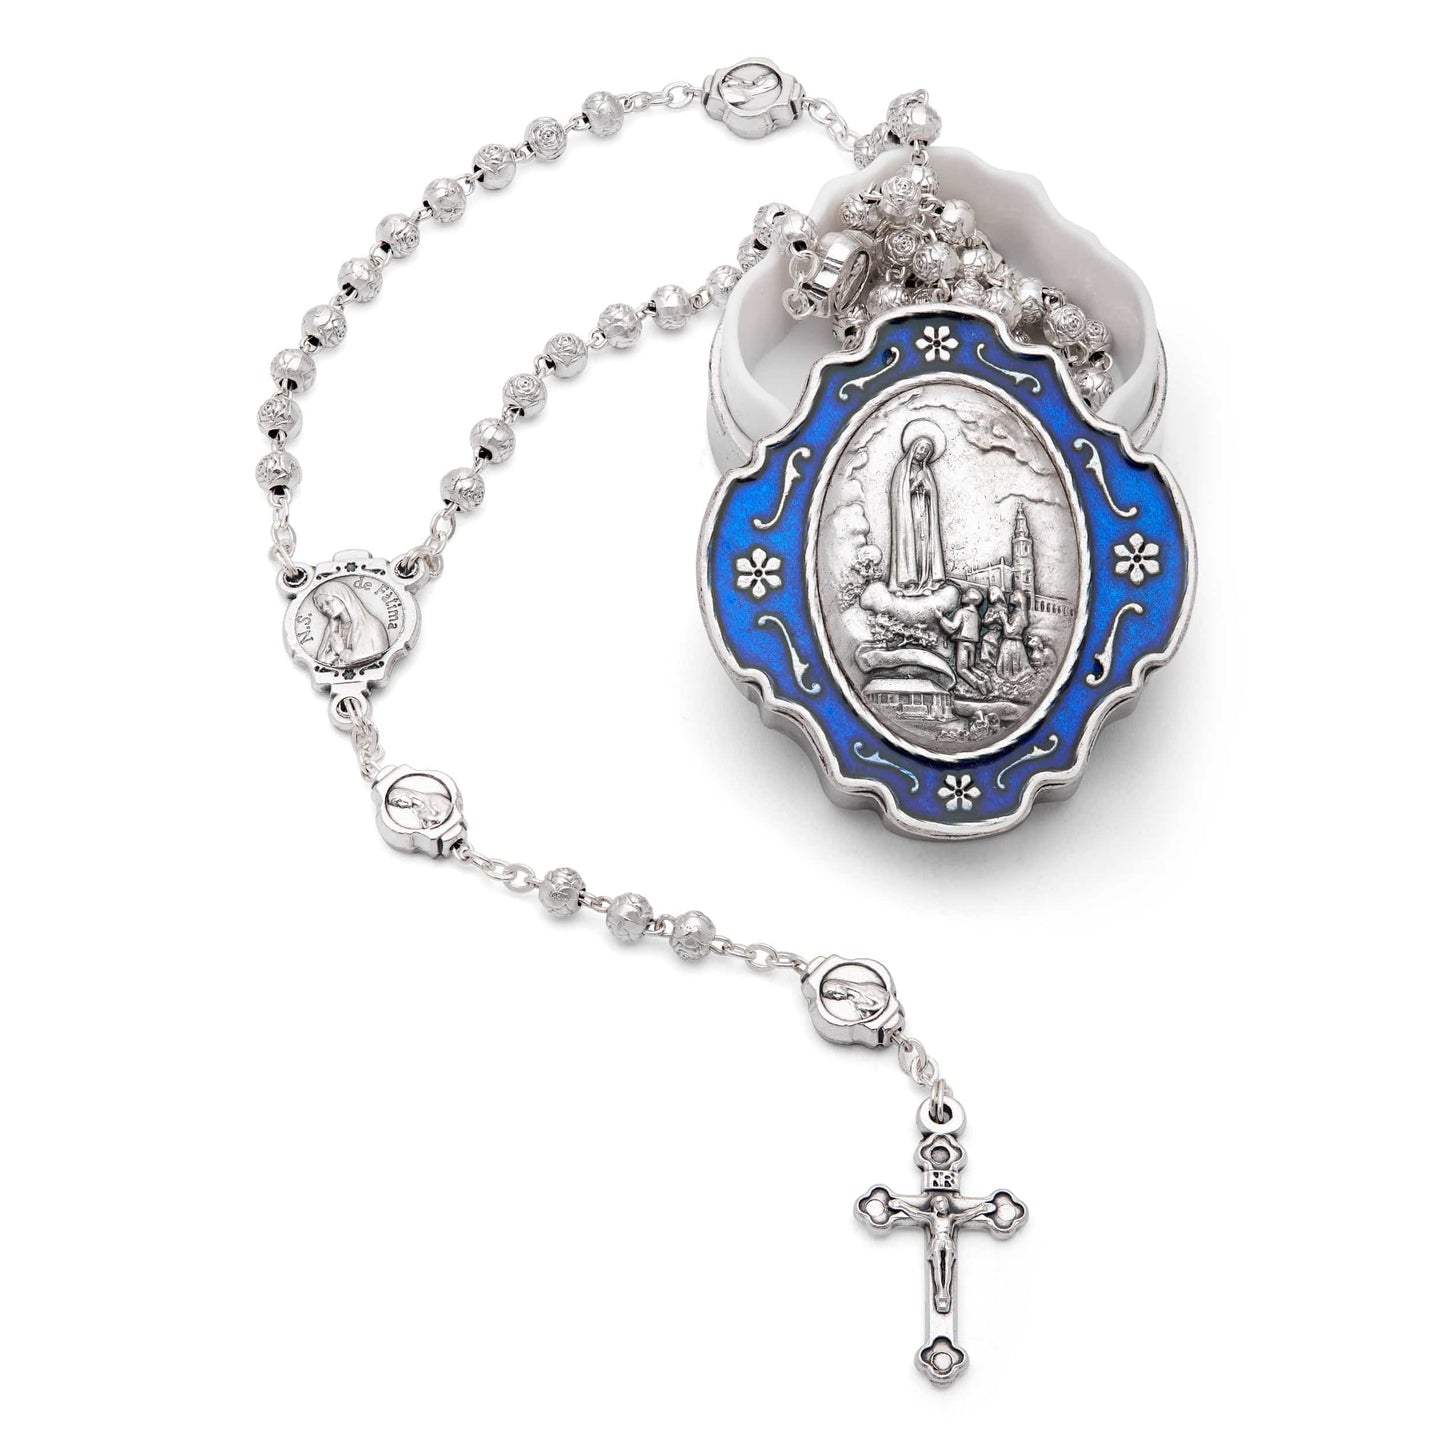 MONDO CATTOLICO Prayer Beads 36 cm (14.17 in) / 4 mm (0.15 in) Our Lady of Fatima Rosary with Holder in Pewter